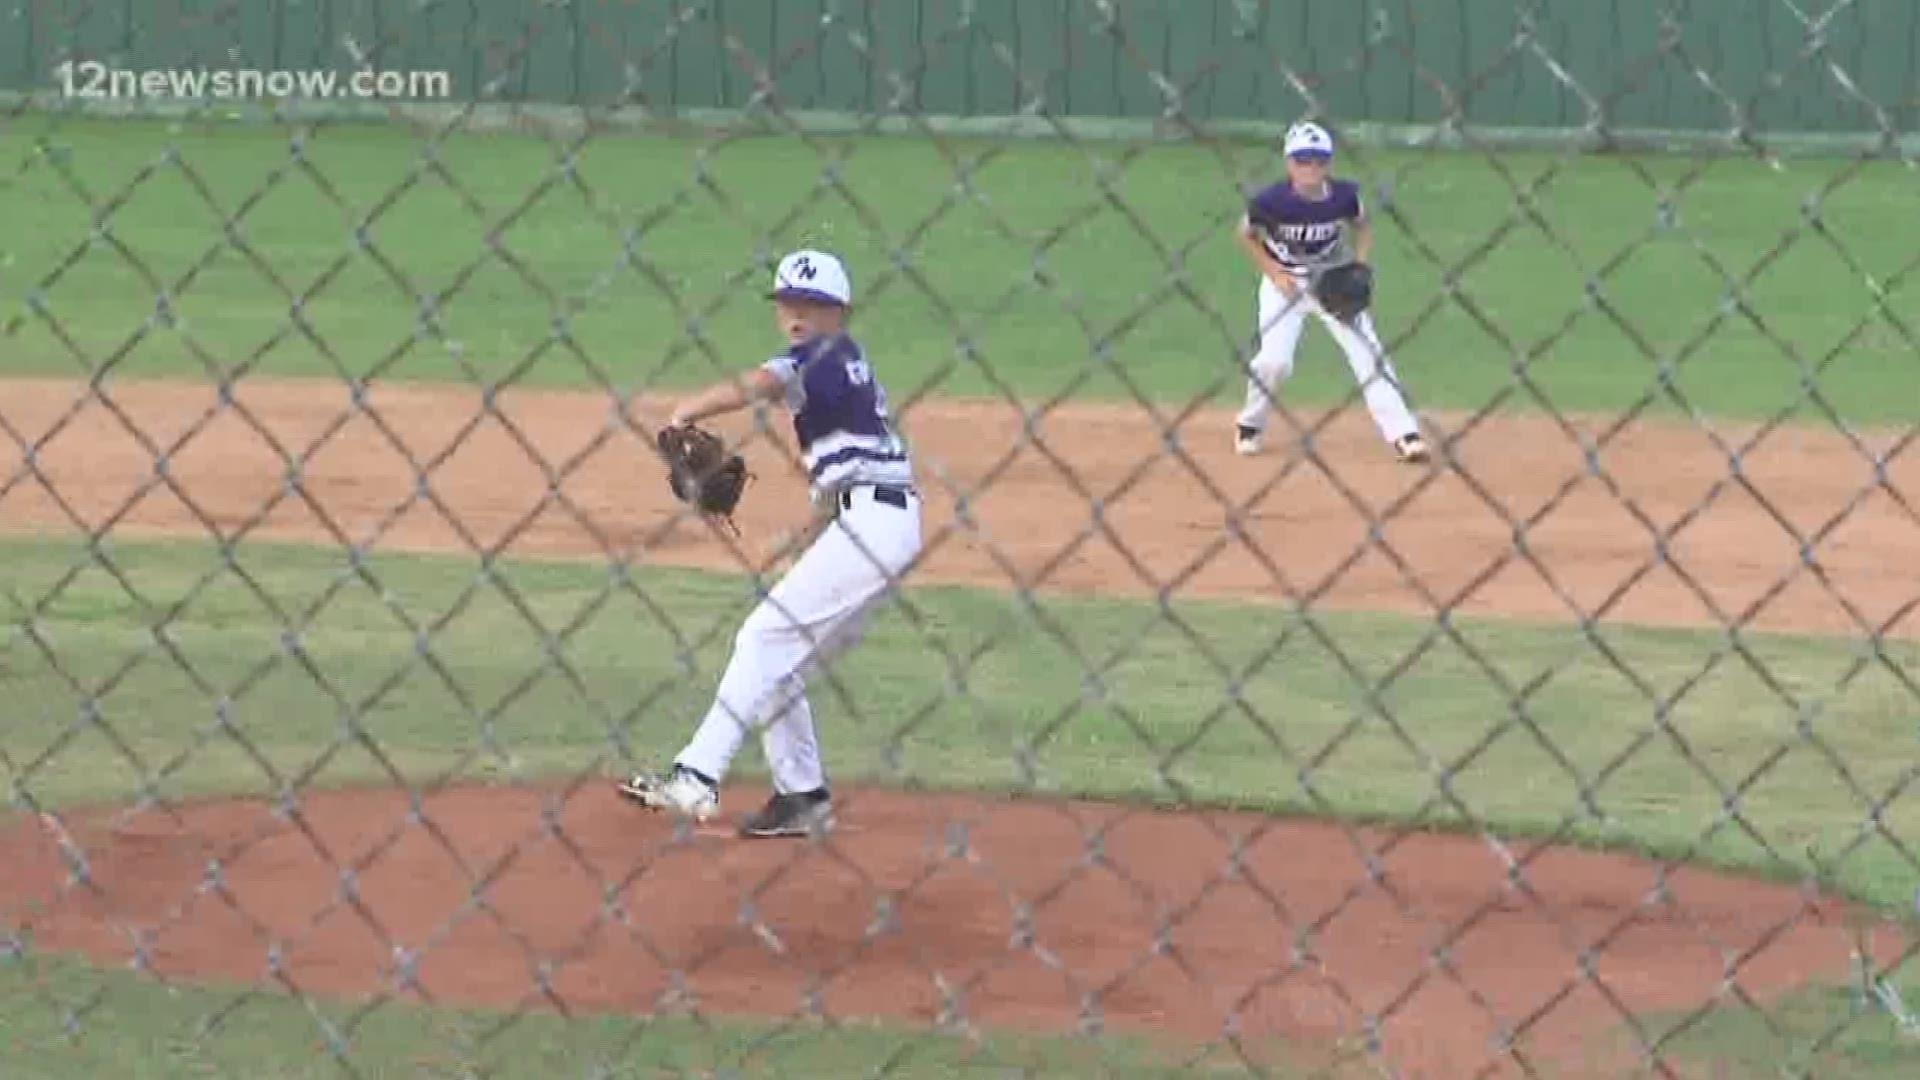 With the win, Port Neches moves on to sectionals to be played at a later date